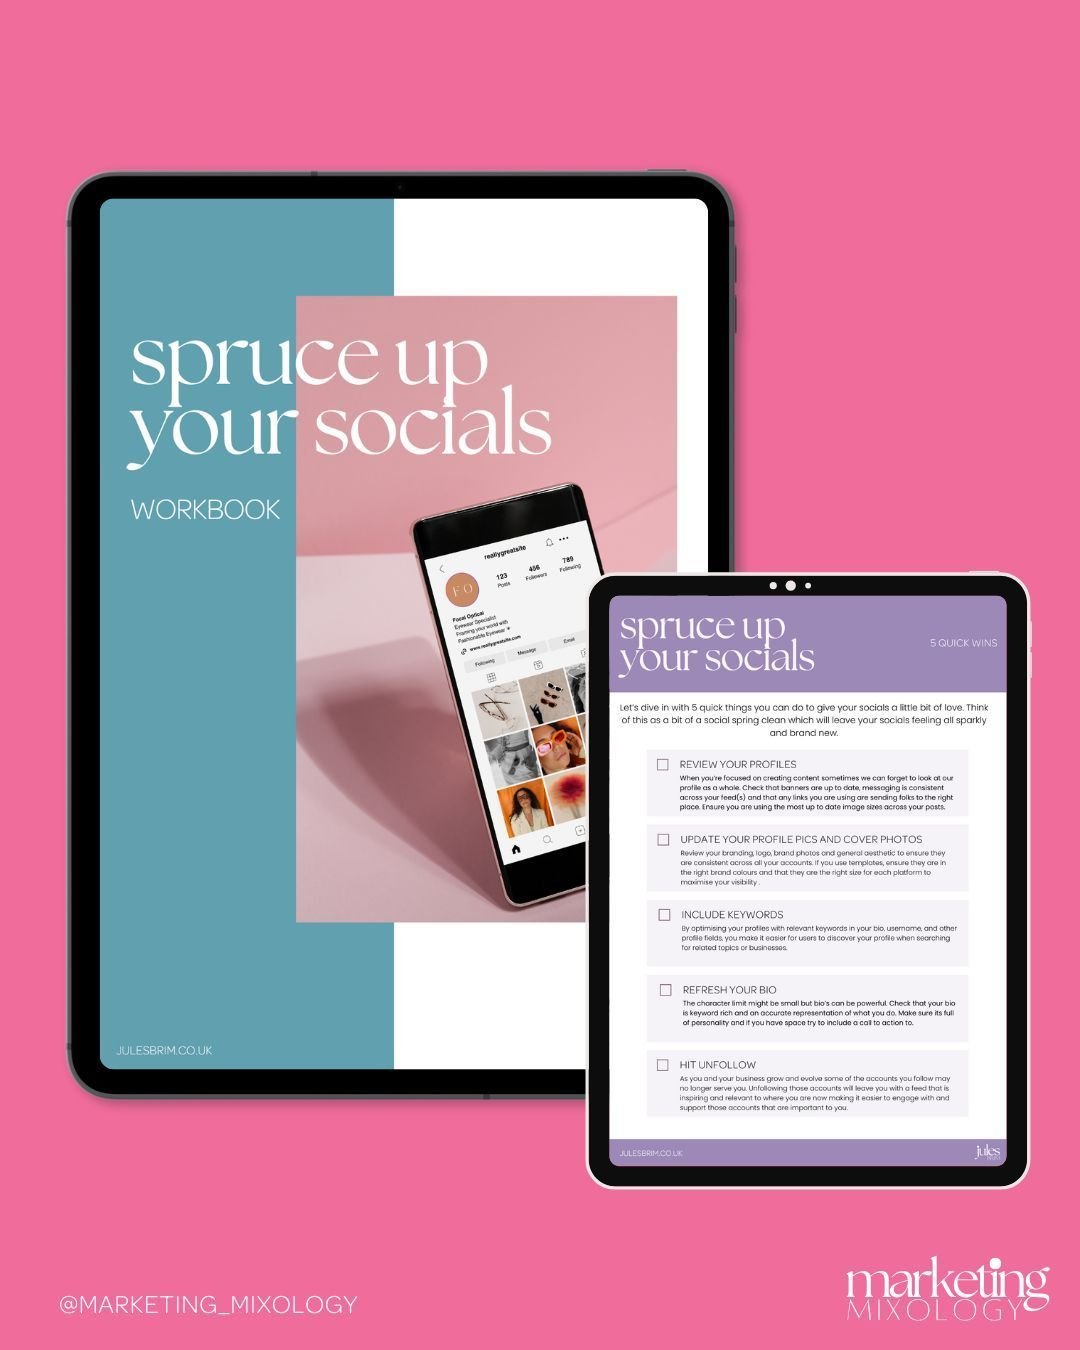 Wanna give your socials a cheeky spruce up before Summer really kicks off?

Download my free workbook to help get your started. 

From 5 quick things you can do to give your socials a little bit of love, to setting yourself some achievable goals this